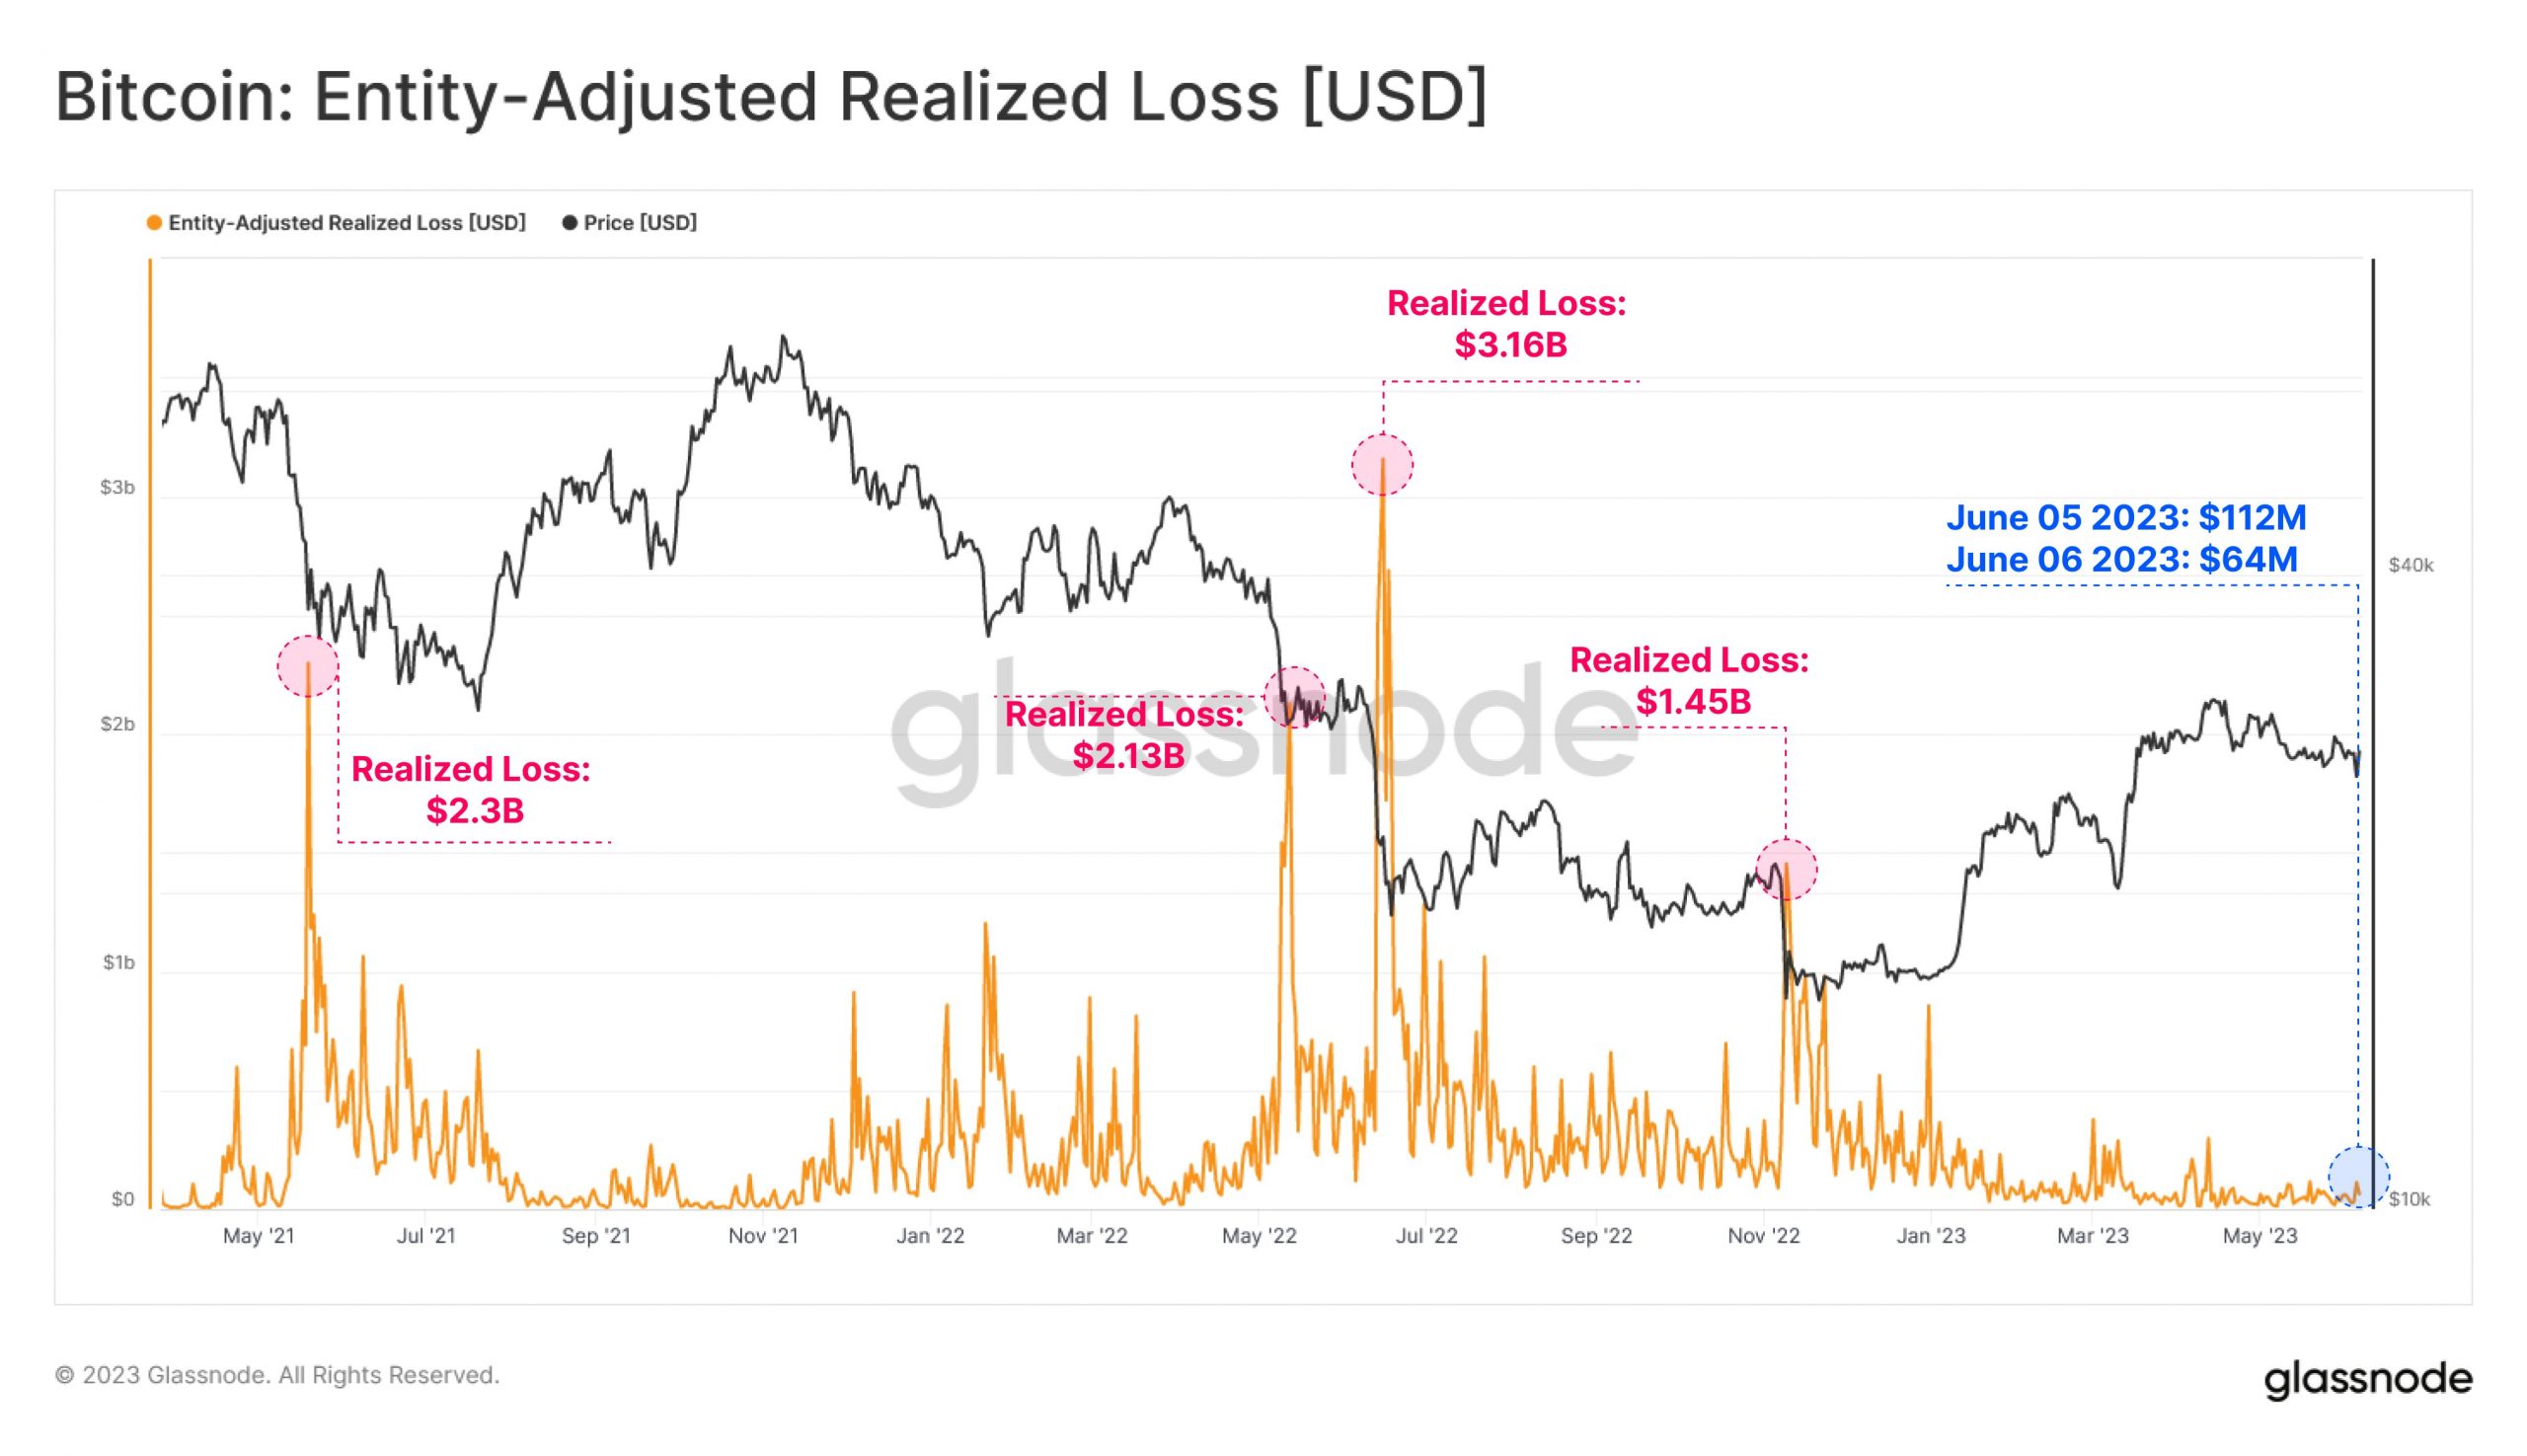 Bitcoin Entity-Adjusted Realized Loss